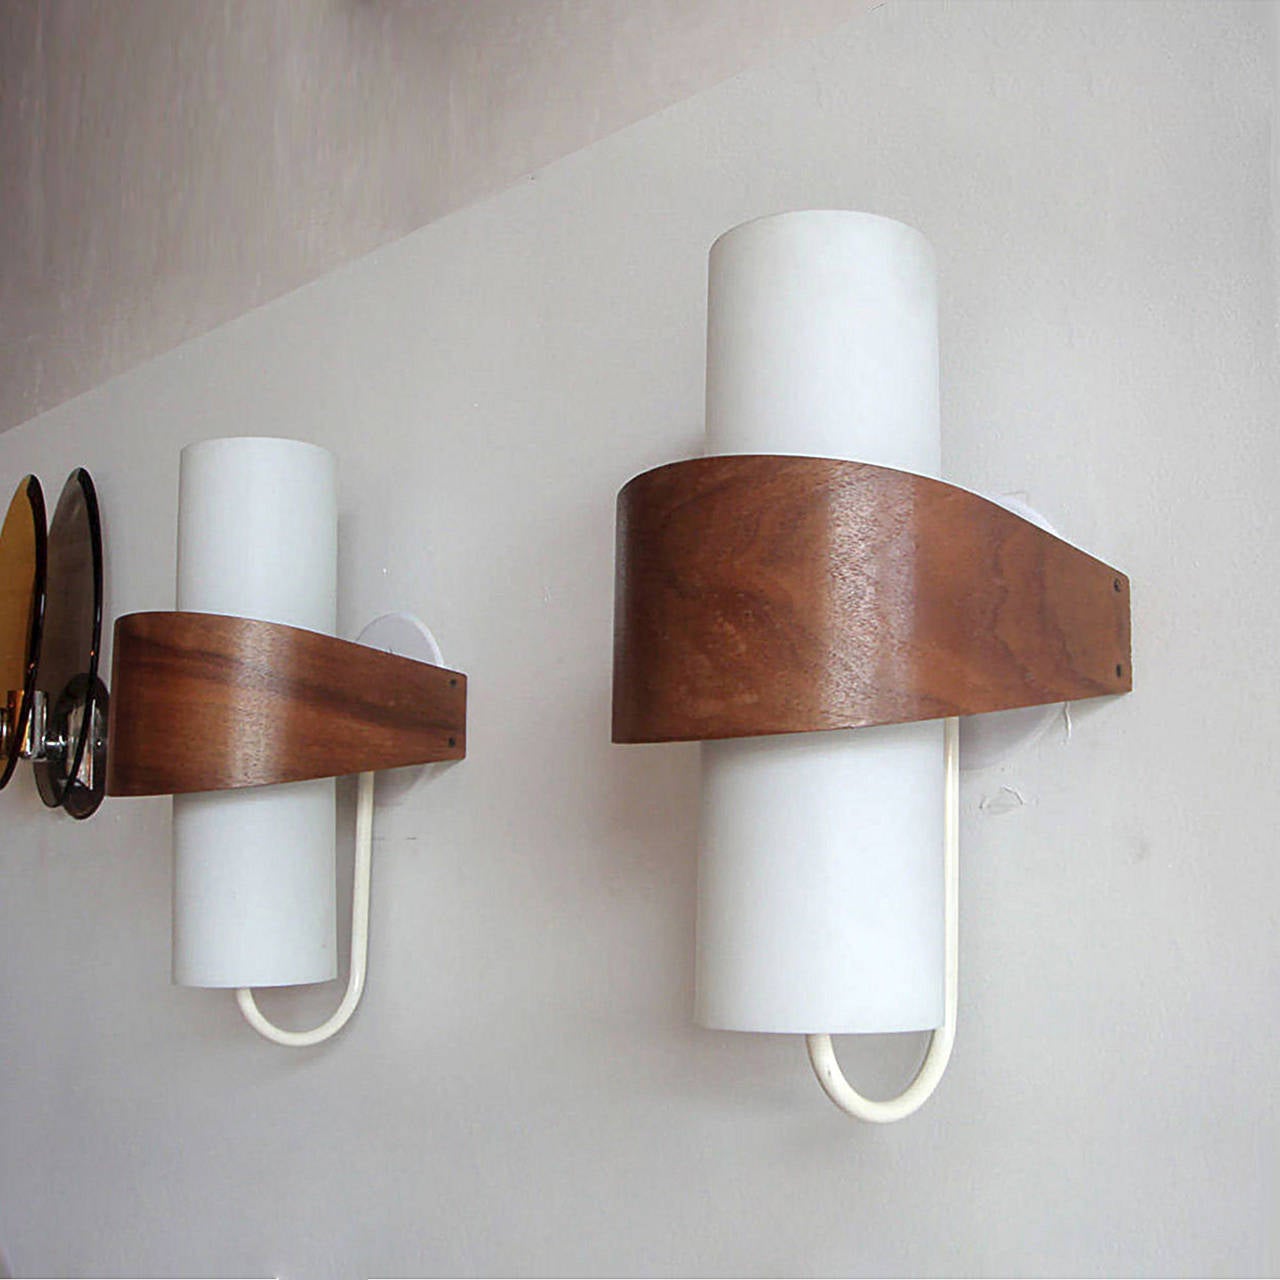 Elegant geometric sconces composed of opaque glass cylinders with a teak veneer wrap. Priced individually.